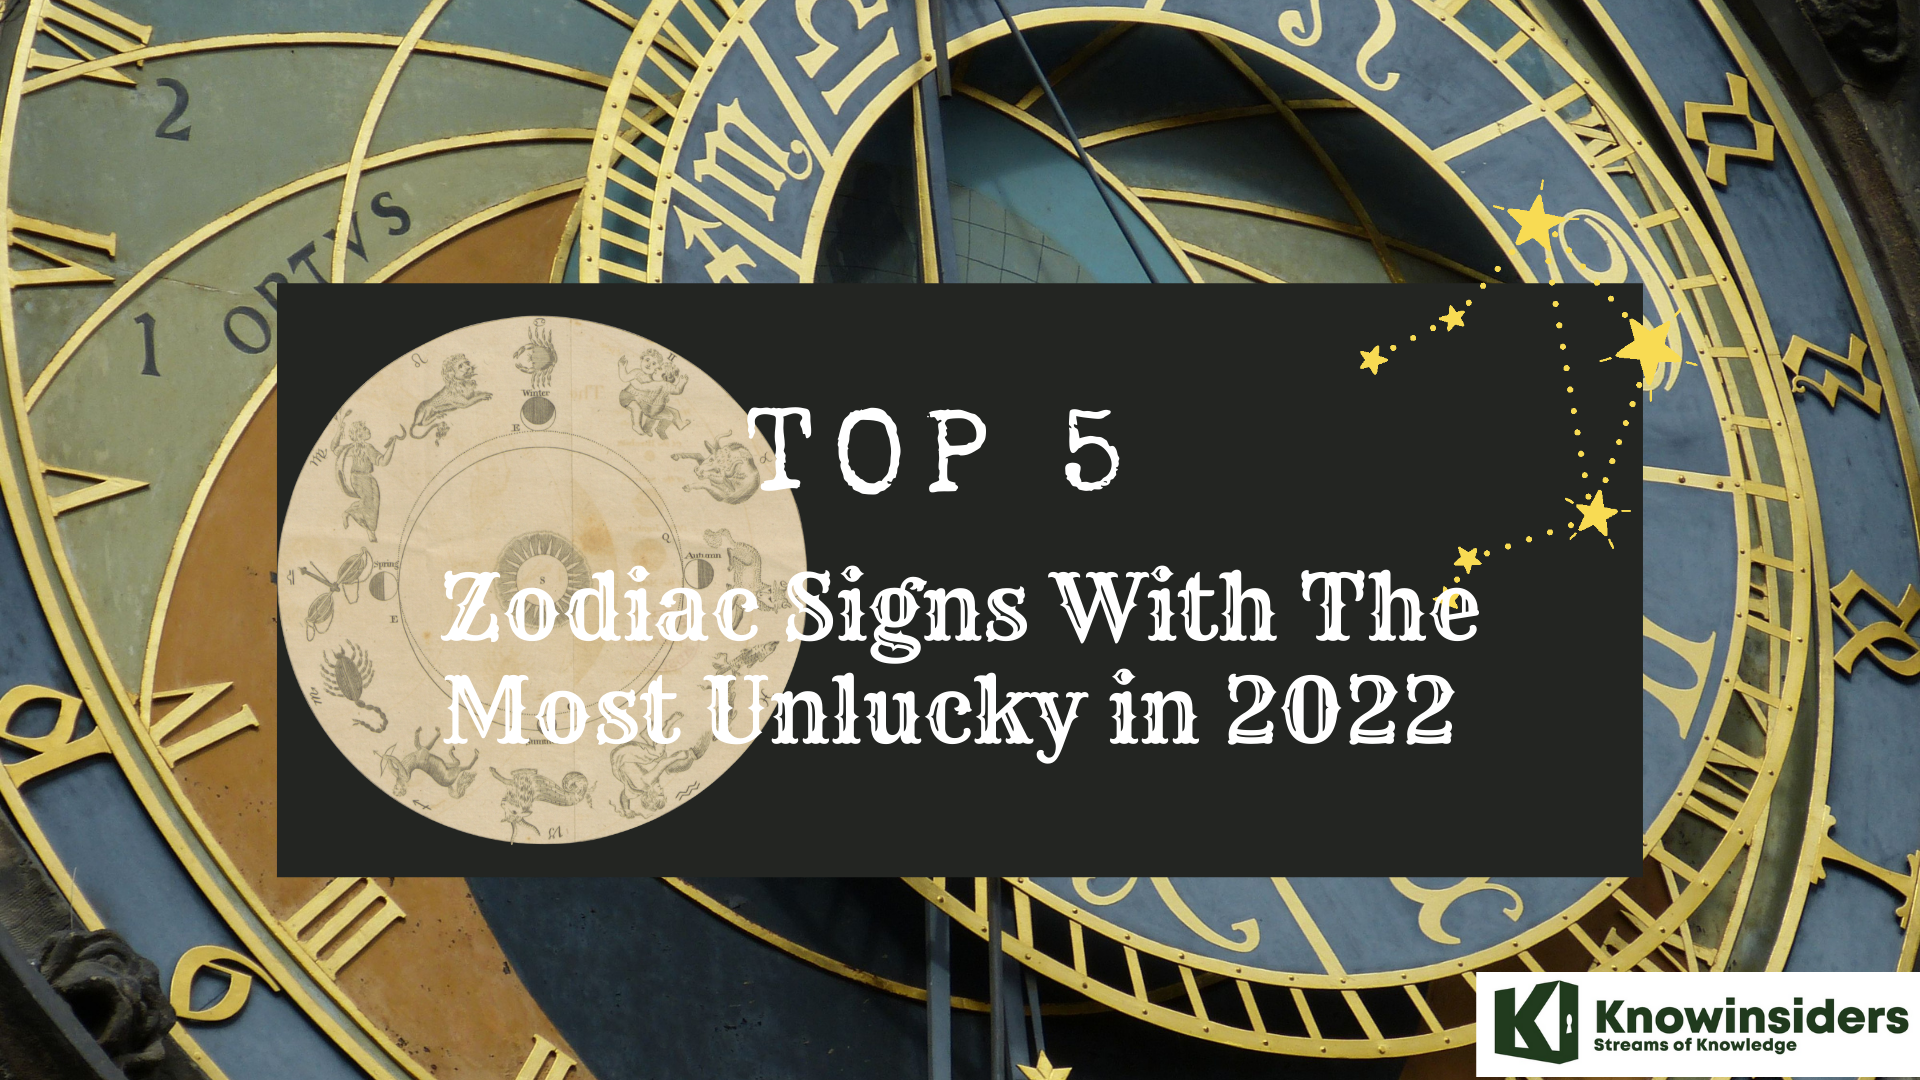 Top 5 Zodiac Signs With The Most Unlucky in 2022